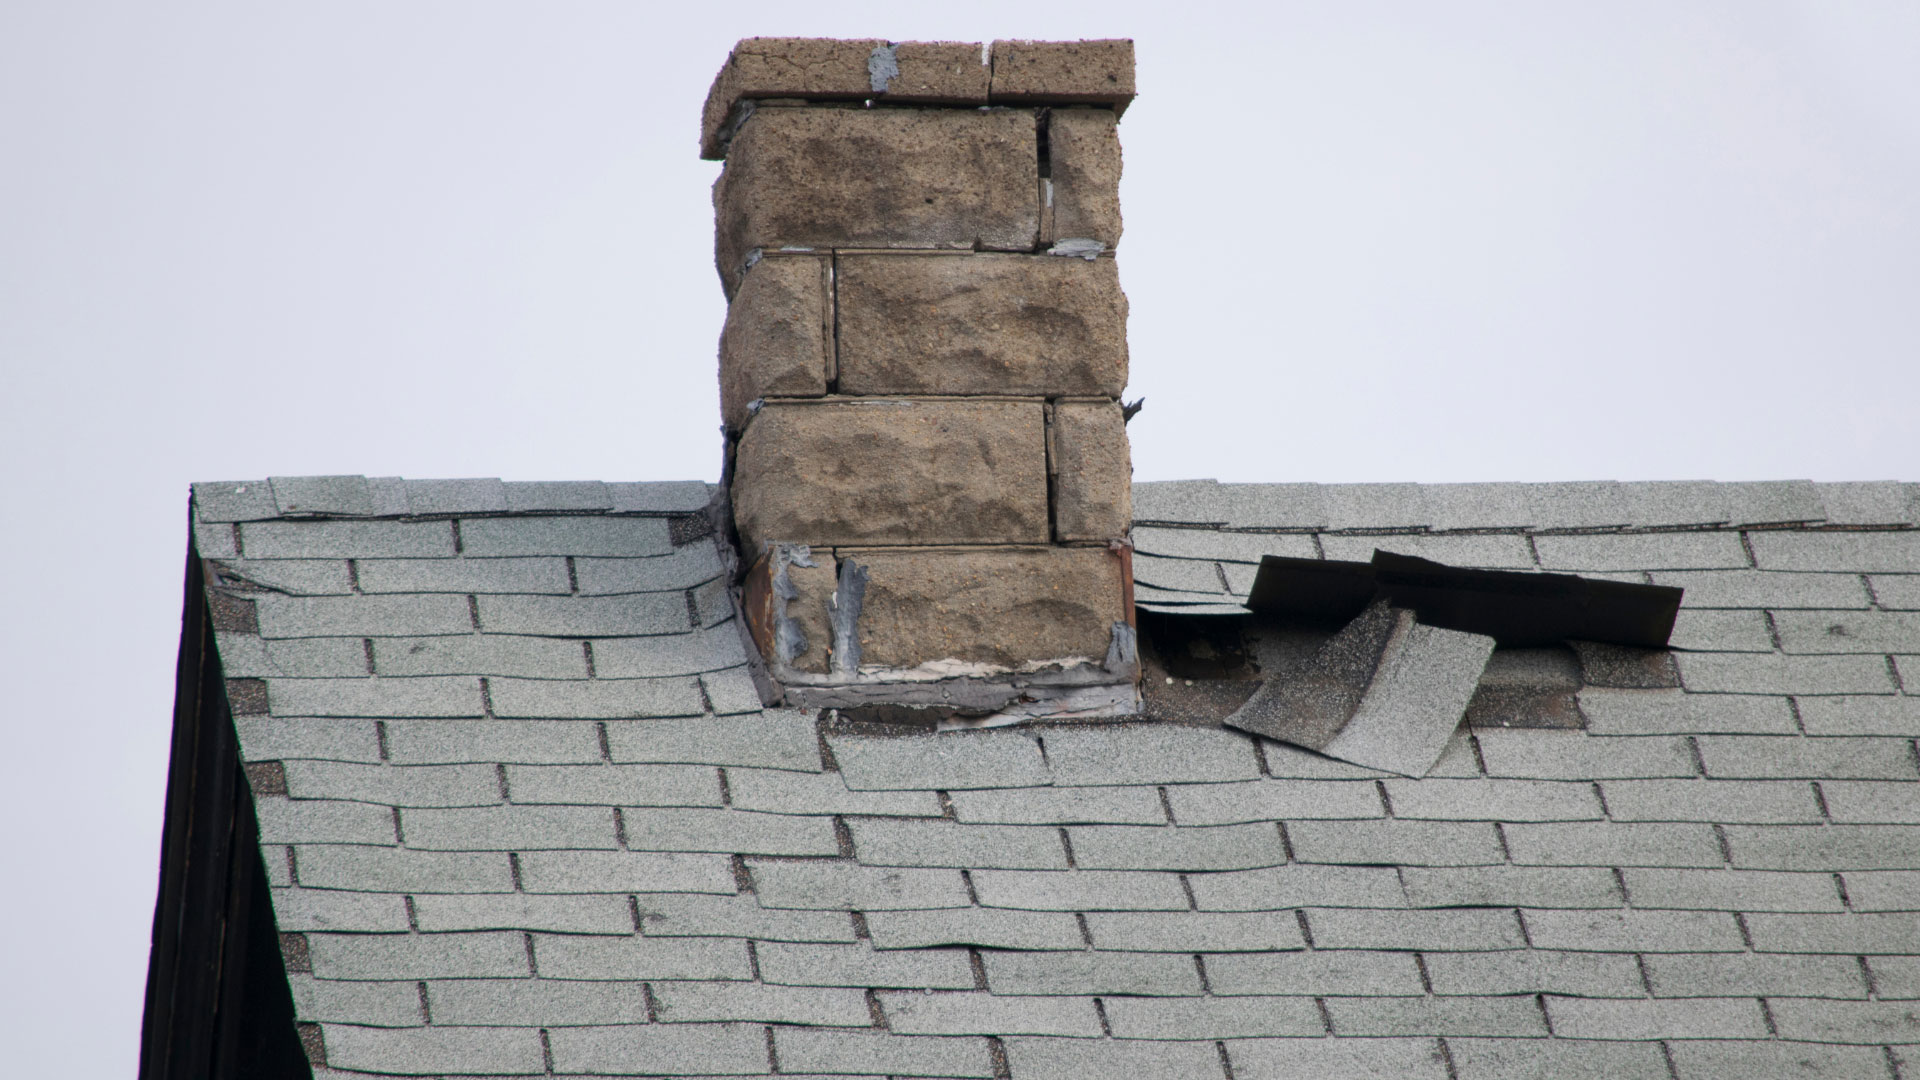 7 Common Types of Roof Damage To Watch Out For